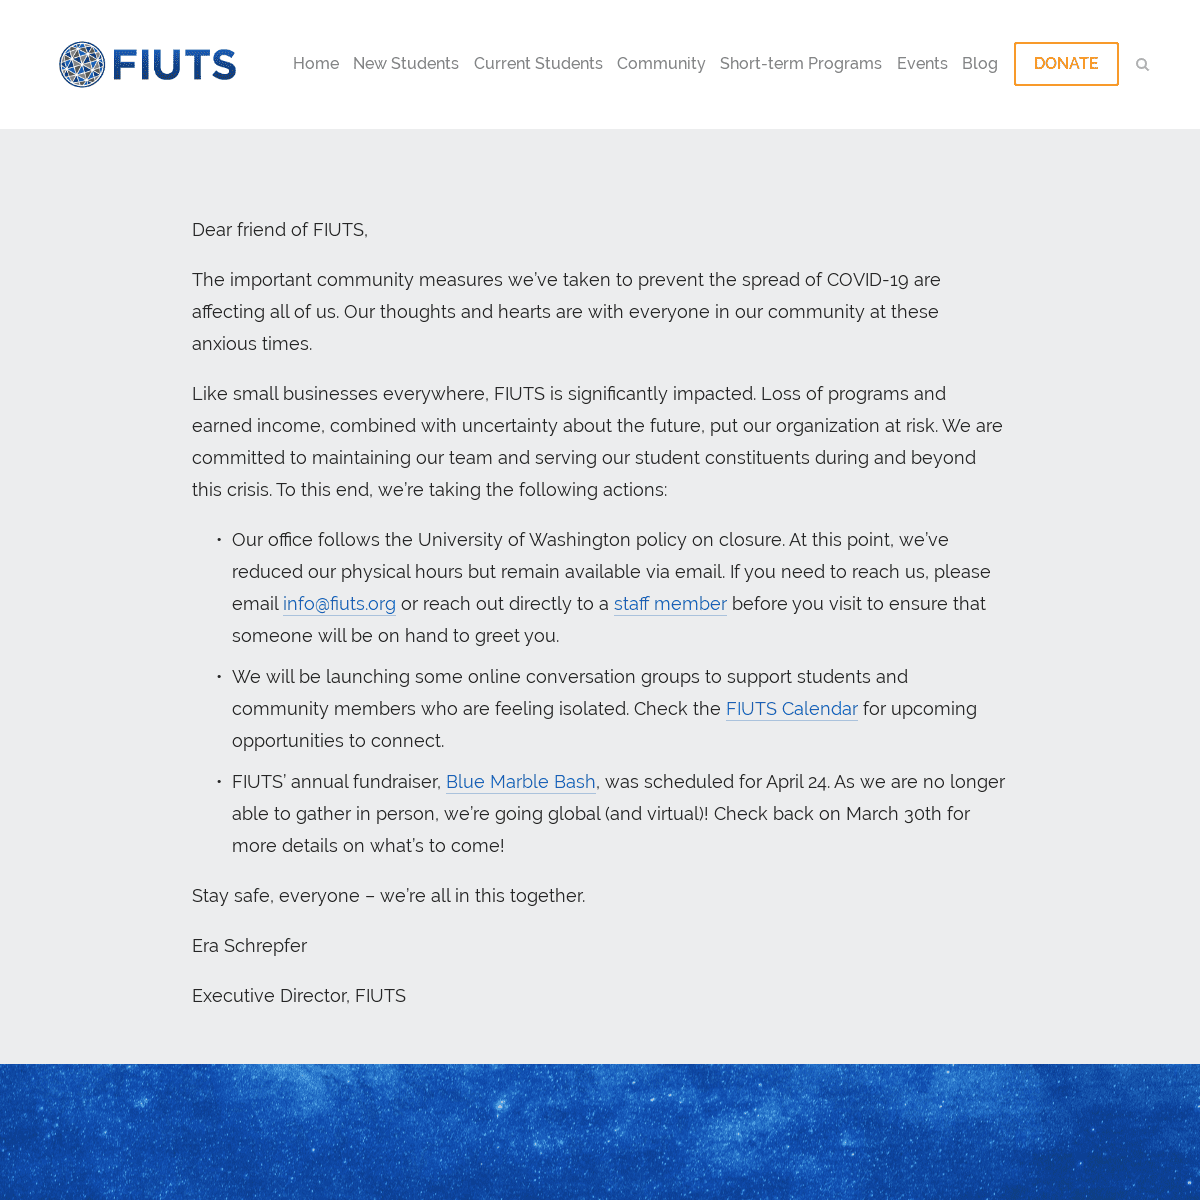 A complete backup of fiuts.org